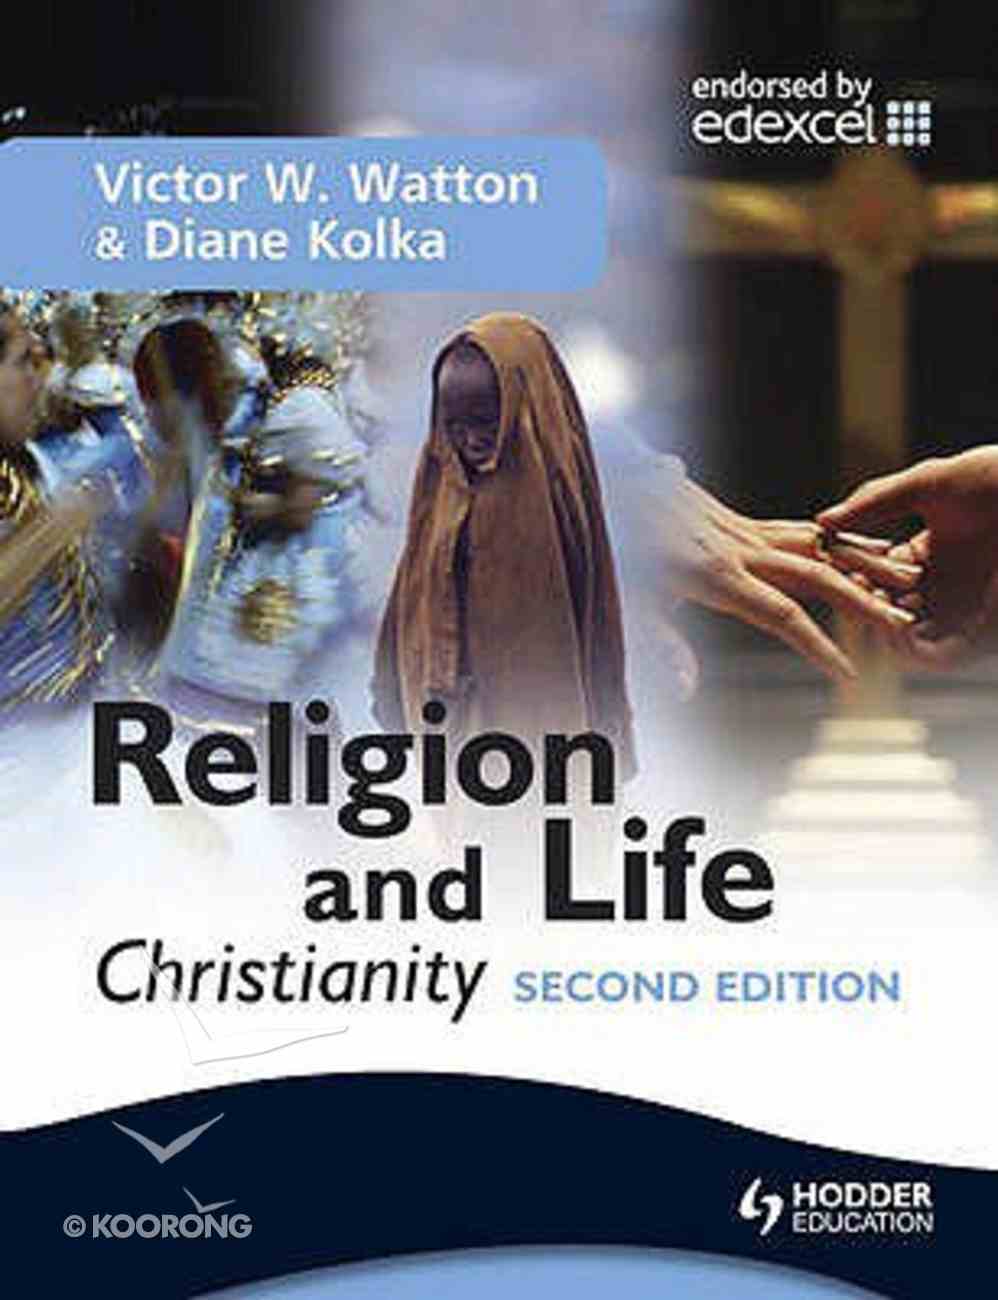 Christianity (2nd Edition) (Religion And Life Series) Paperback